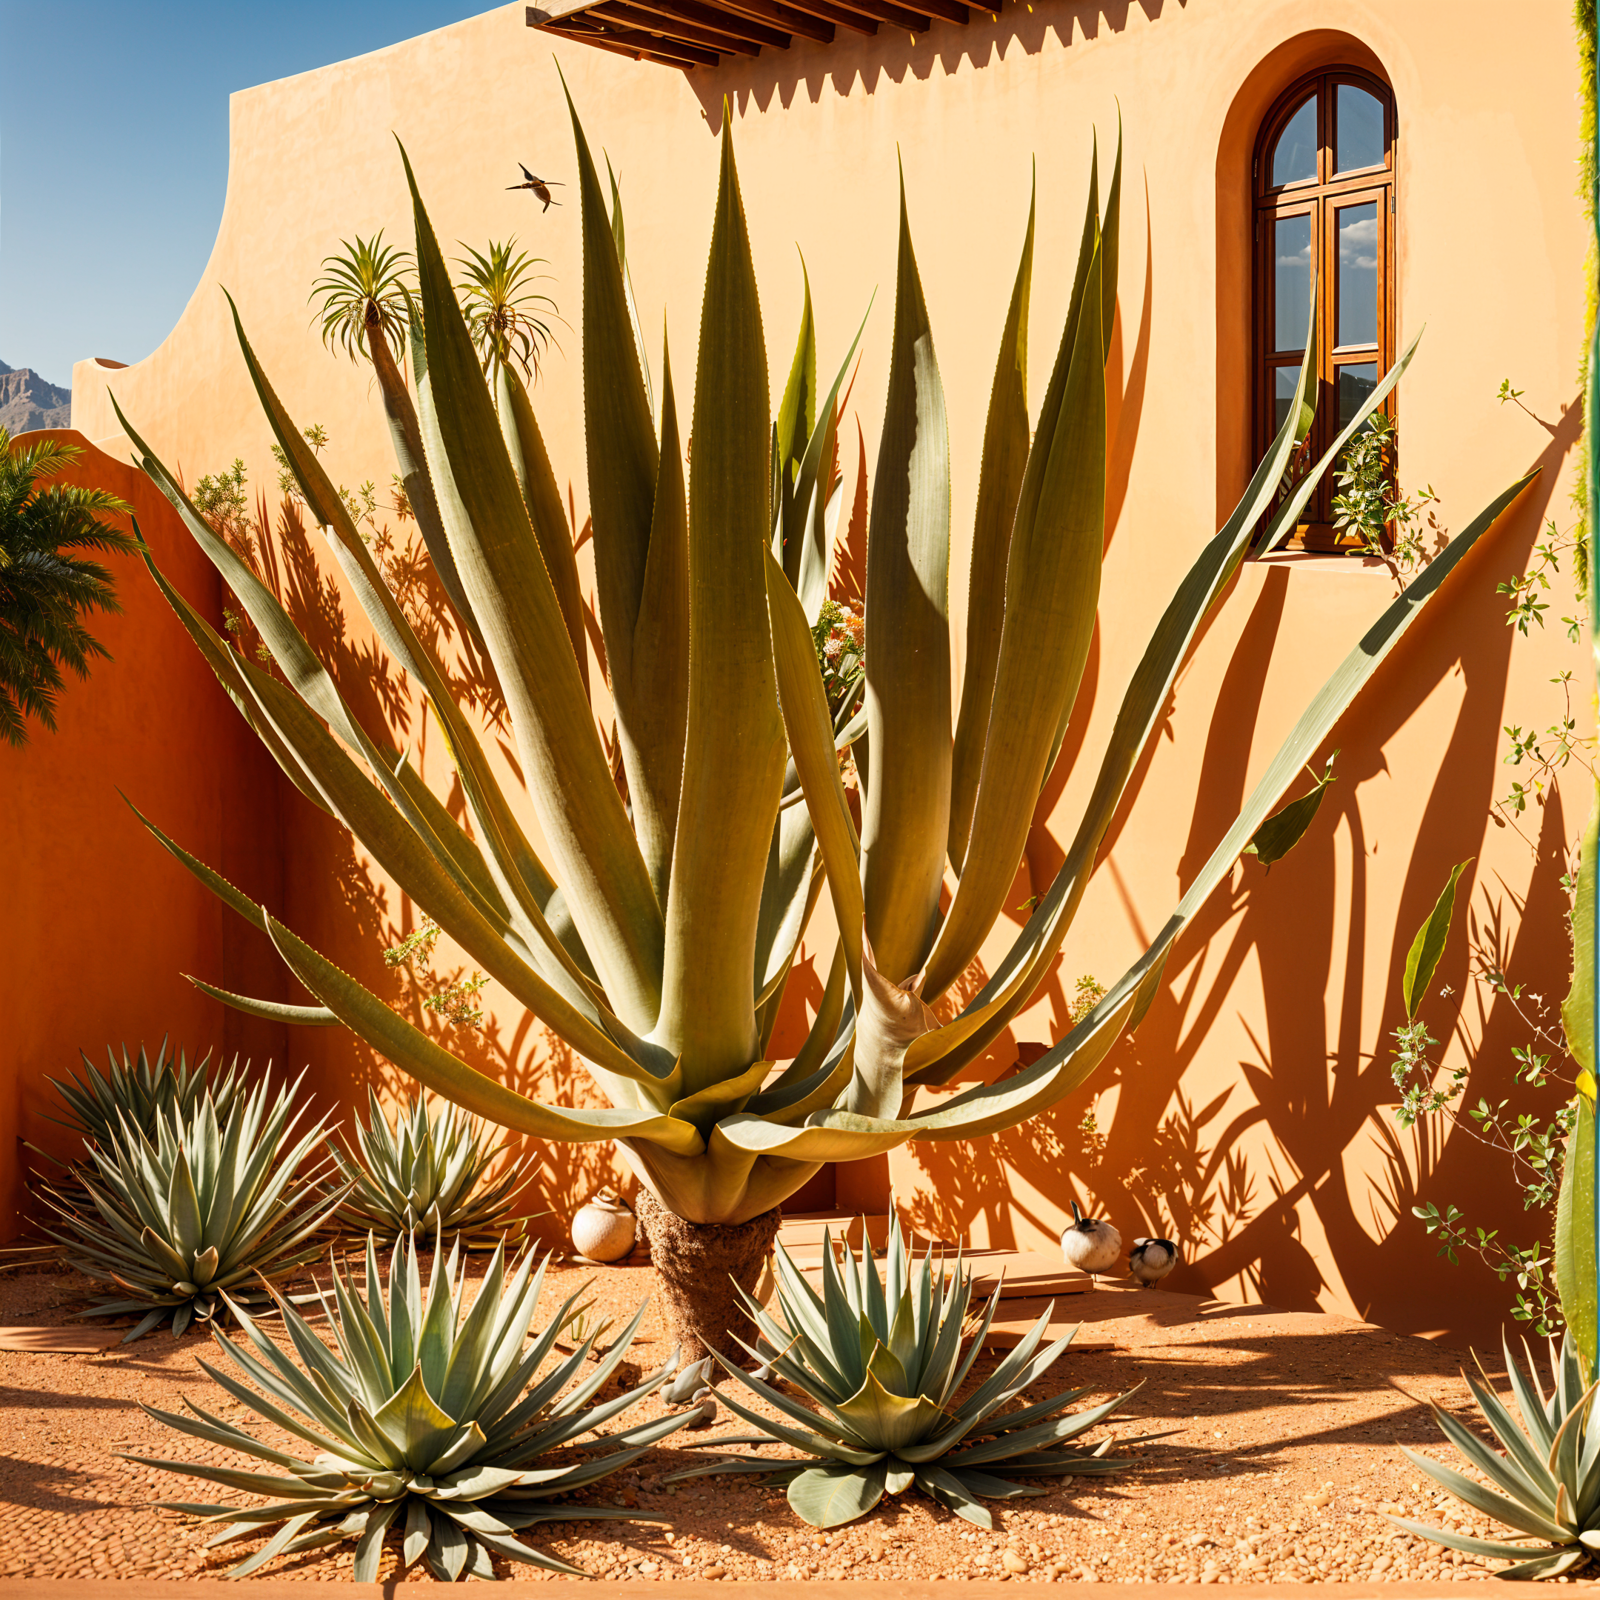 Agave americana plant in a sunny Mexican-style garden with a panoramic desert view.